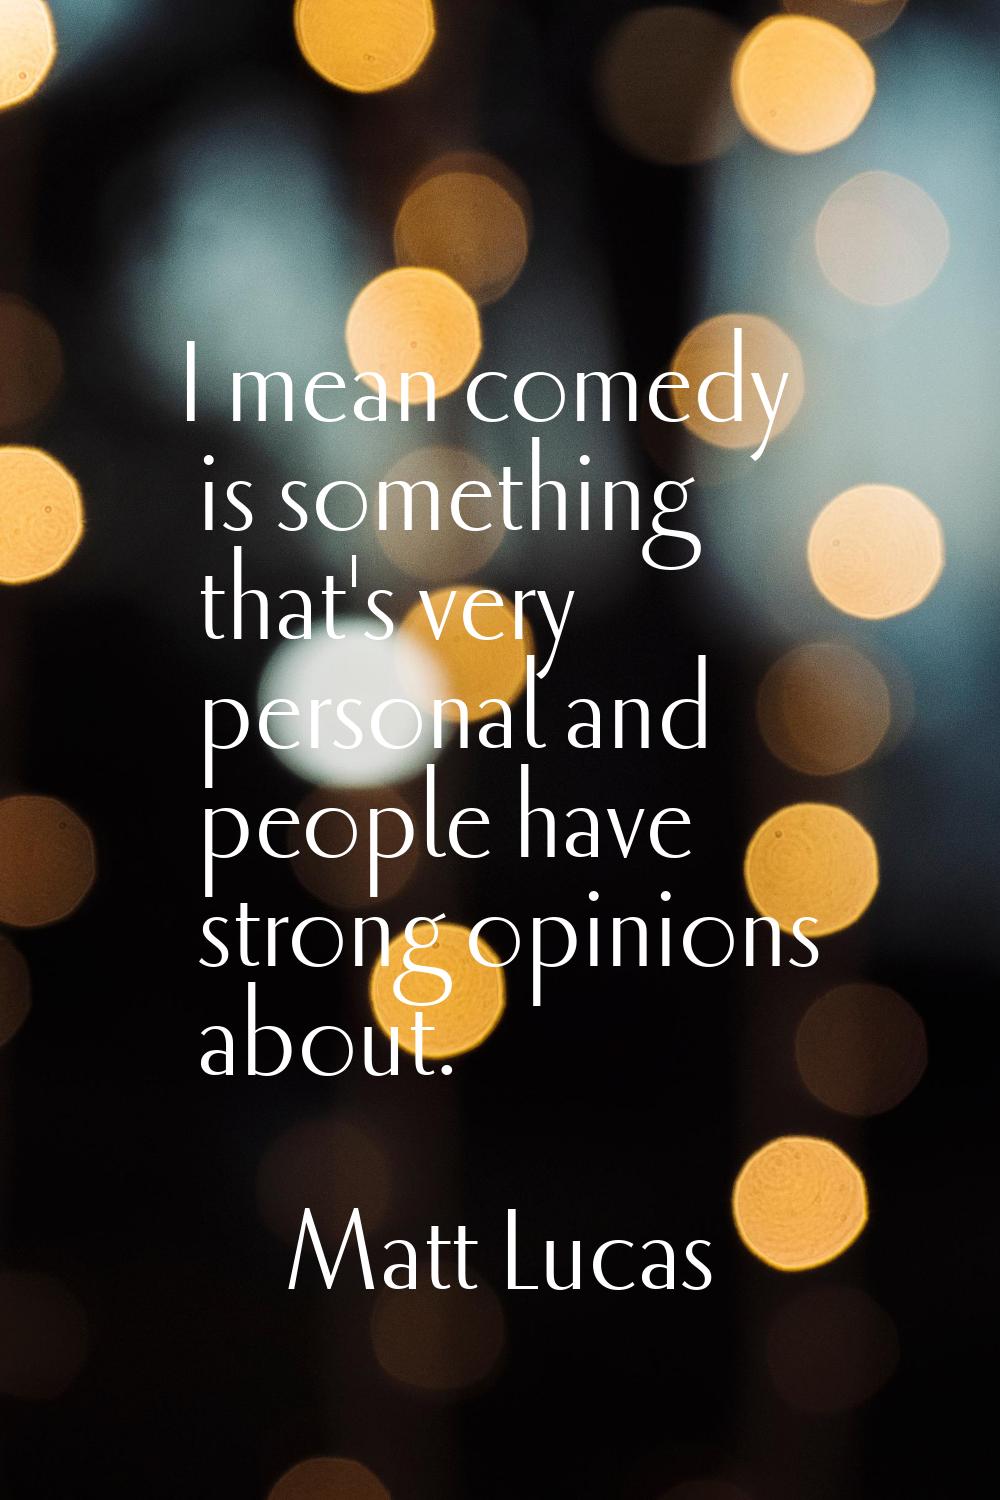 I mean comedy is something that's very personal and people have strong opinions about.